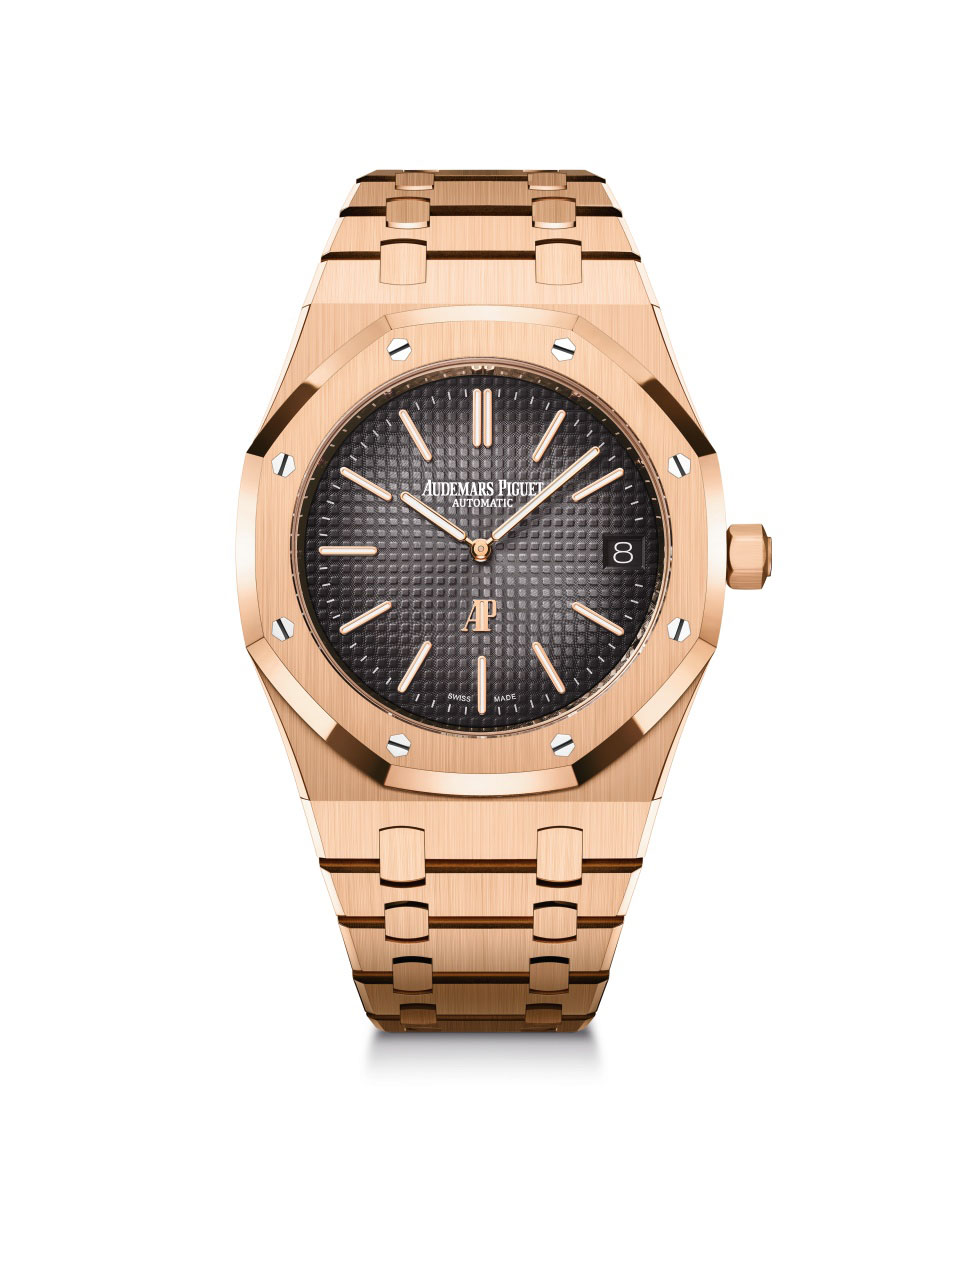 Royal Oak “Jumbo” Extra-Thin / 39mm; Ref. 16202OR.OO.1240OR.01 in 18-carat pink gold with smoked grey dial